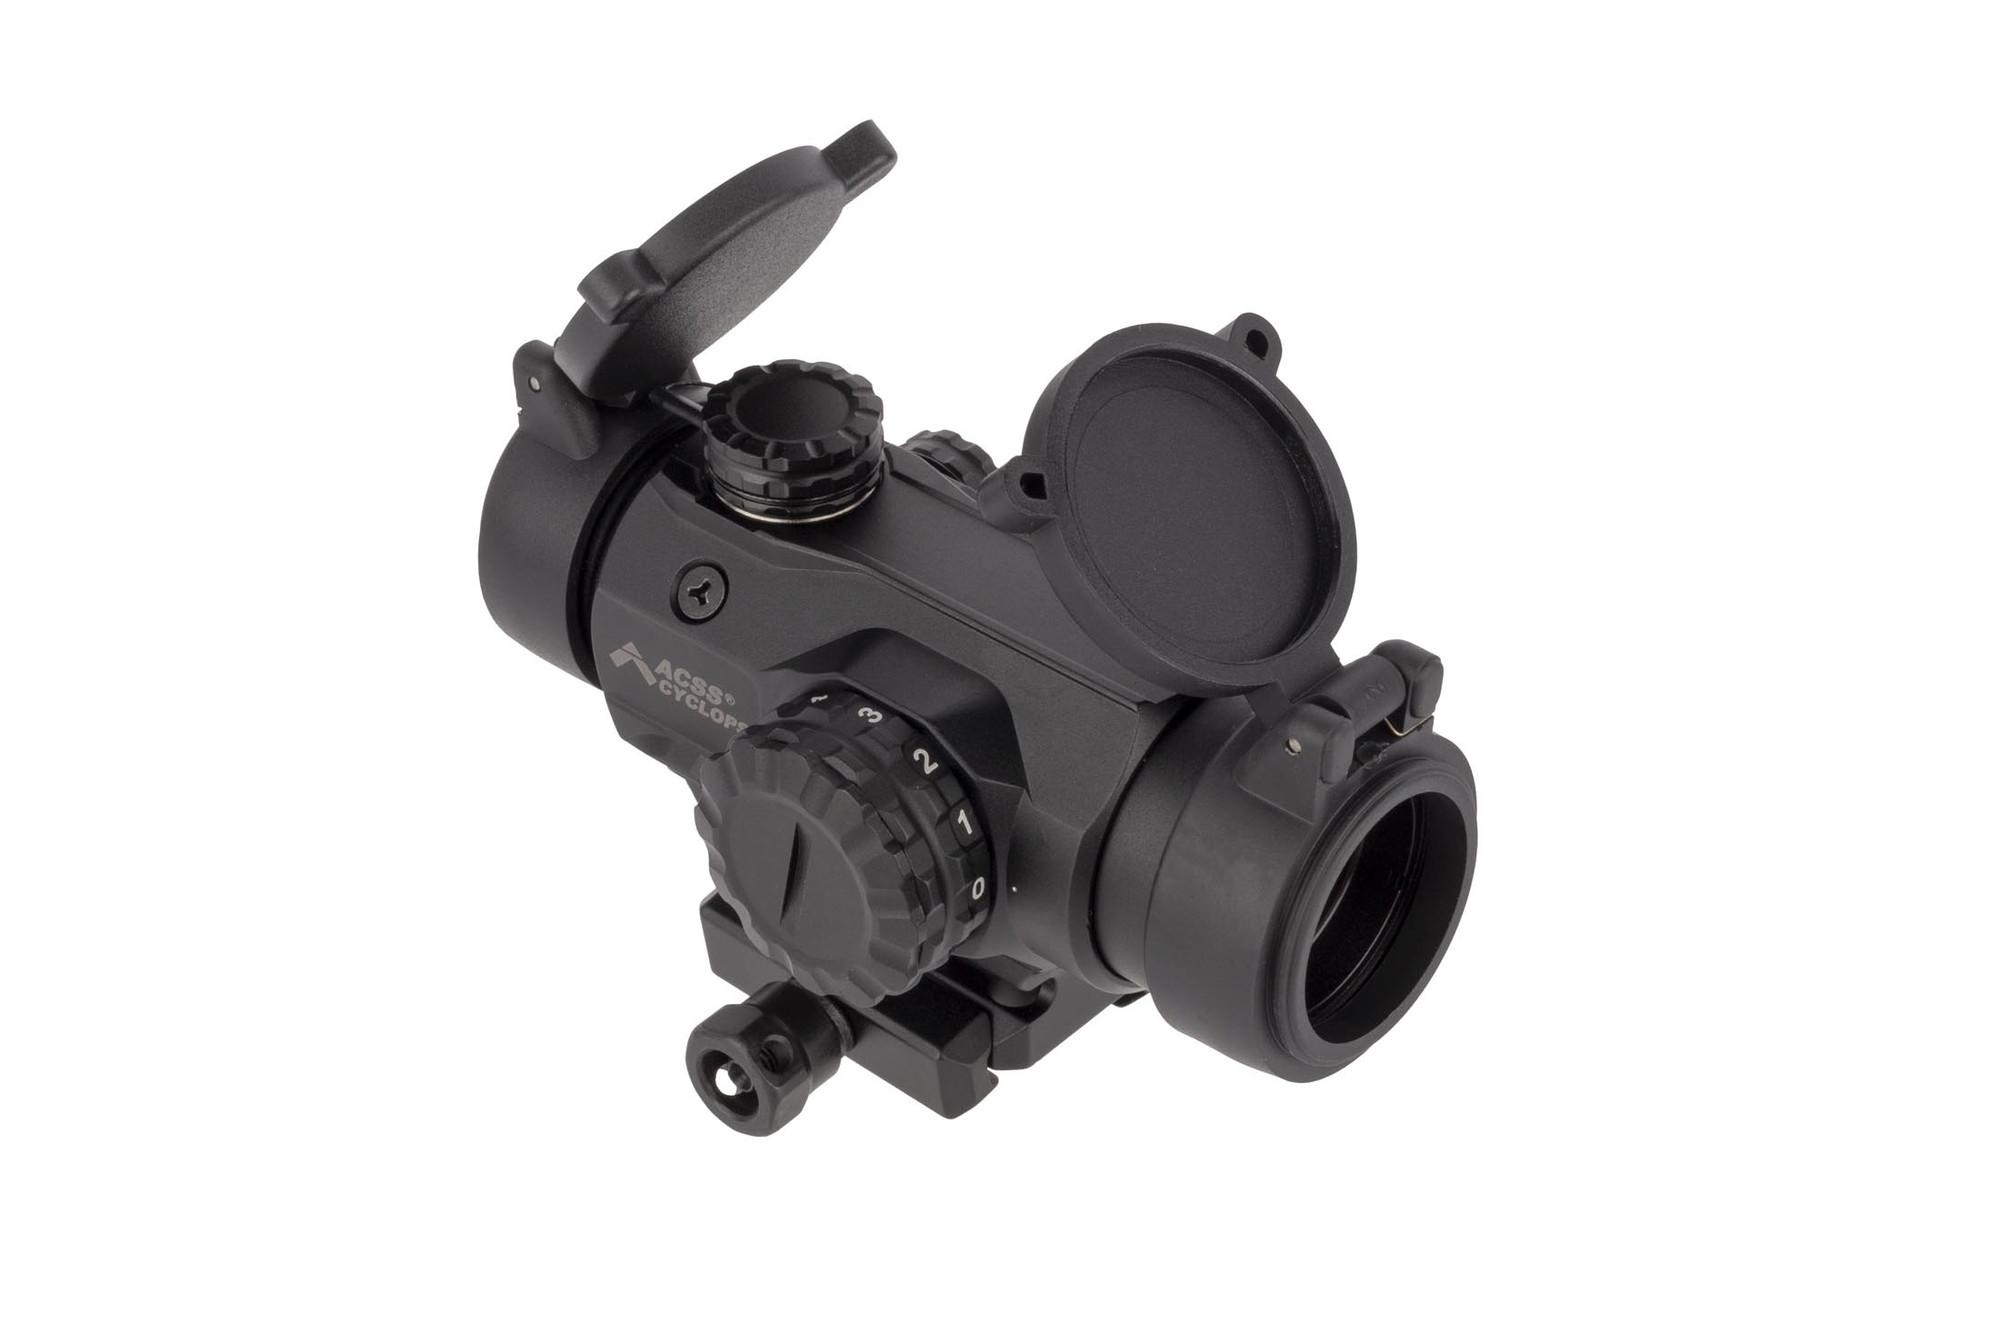 Primary Arms SLx Compact 1x20mm Prism Scope - ACSS Cyclops 